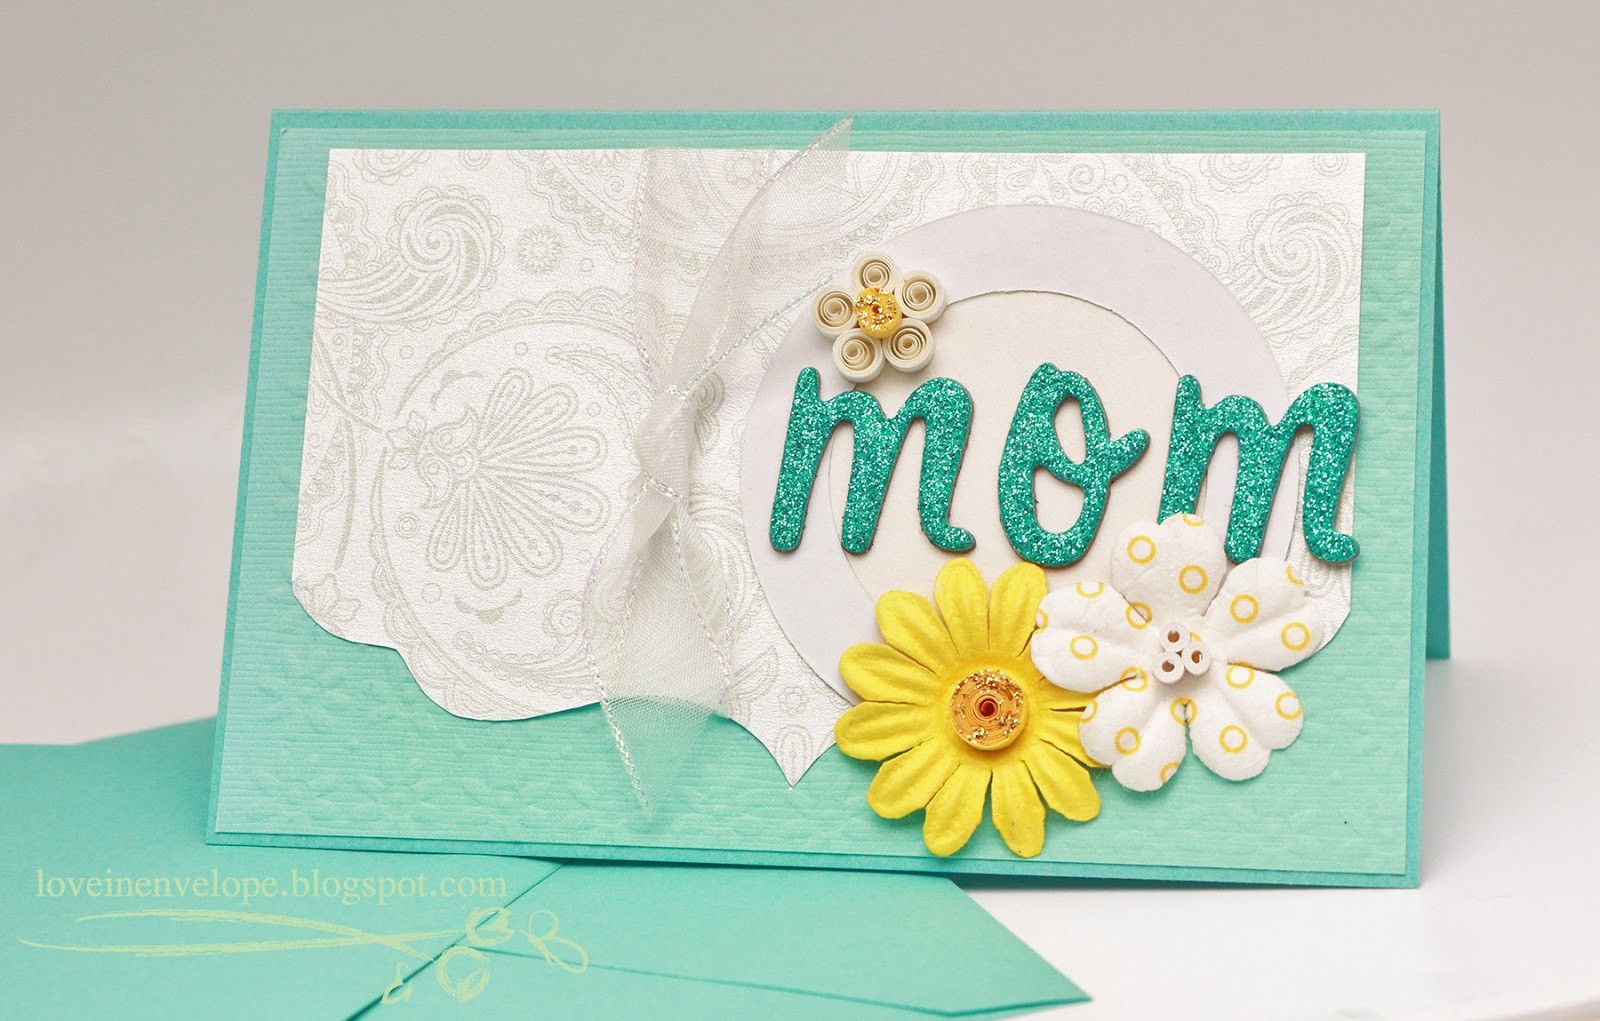 Homemade Birthday Cards For Mom
 Love in Envelope Tiffany Blue Quilling Handmade Card for Mom